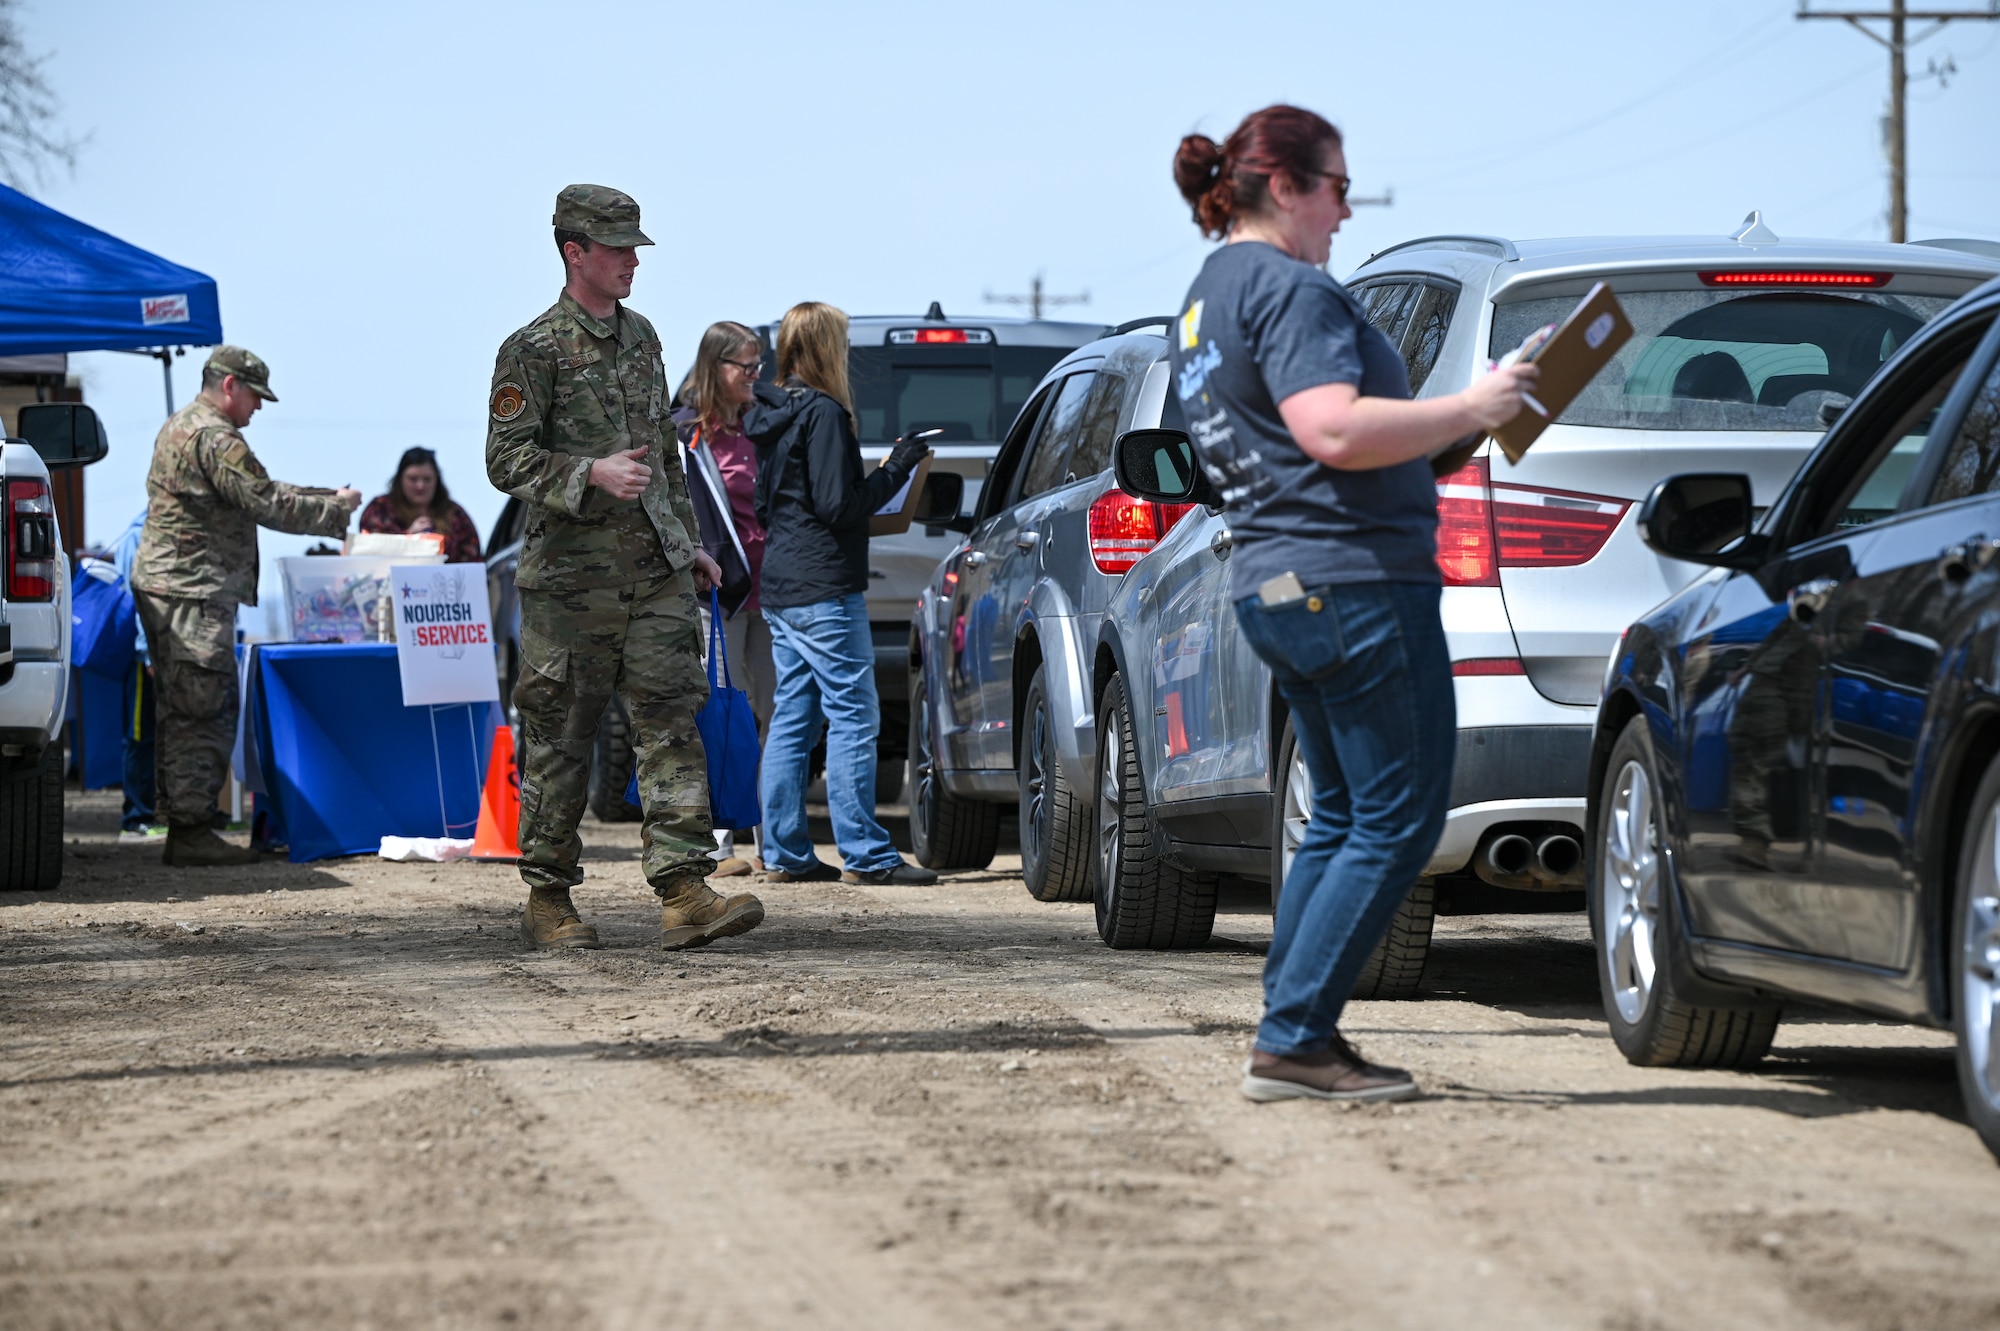 Volunteers load vehicles during a Nourish the Service event at Hill Air Force Base, Utah, April 1, 2022. The event provided new and soon-to-be parents with non-perishable food items, baby care supplies and resource information. (U.S. Air Force photo by R. Nial Bradshaw)